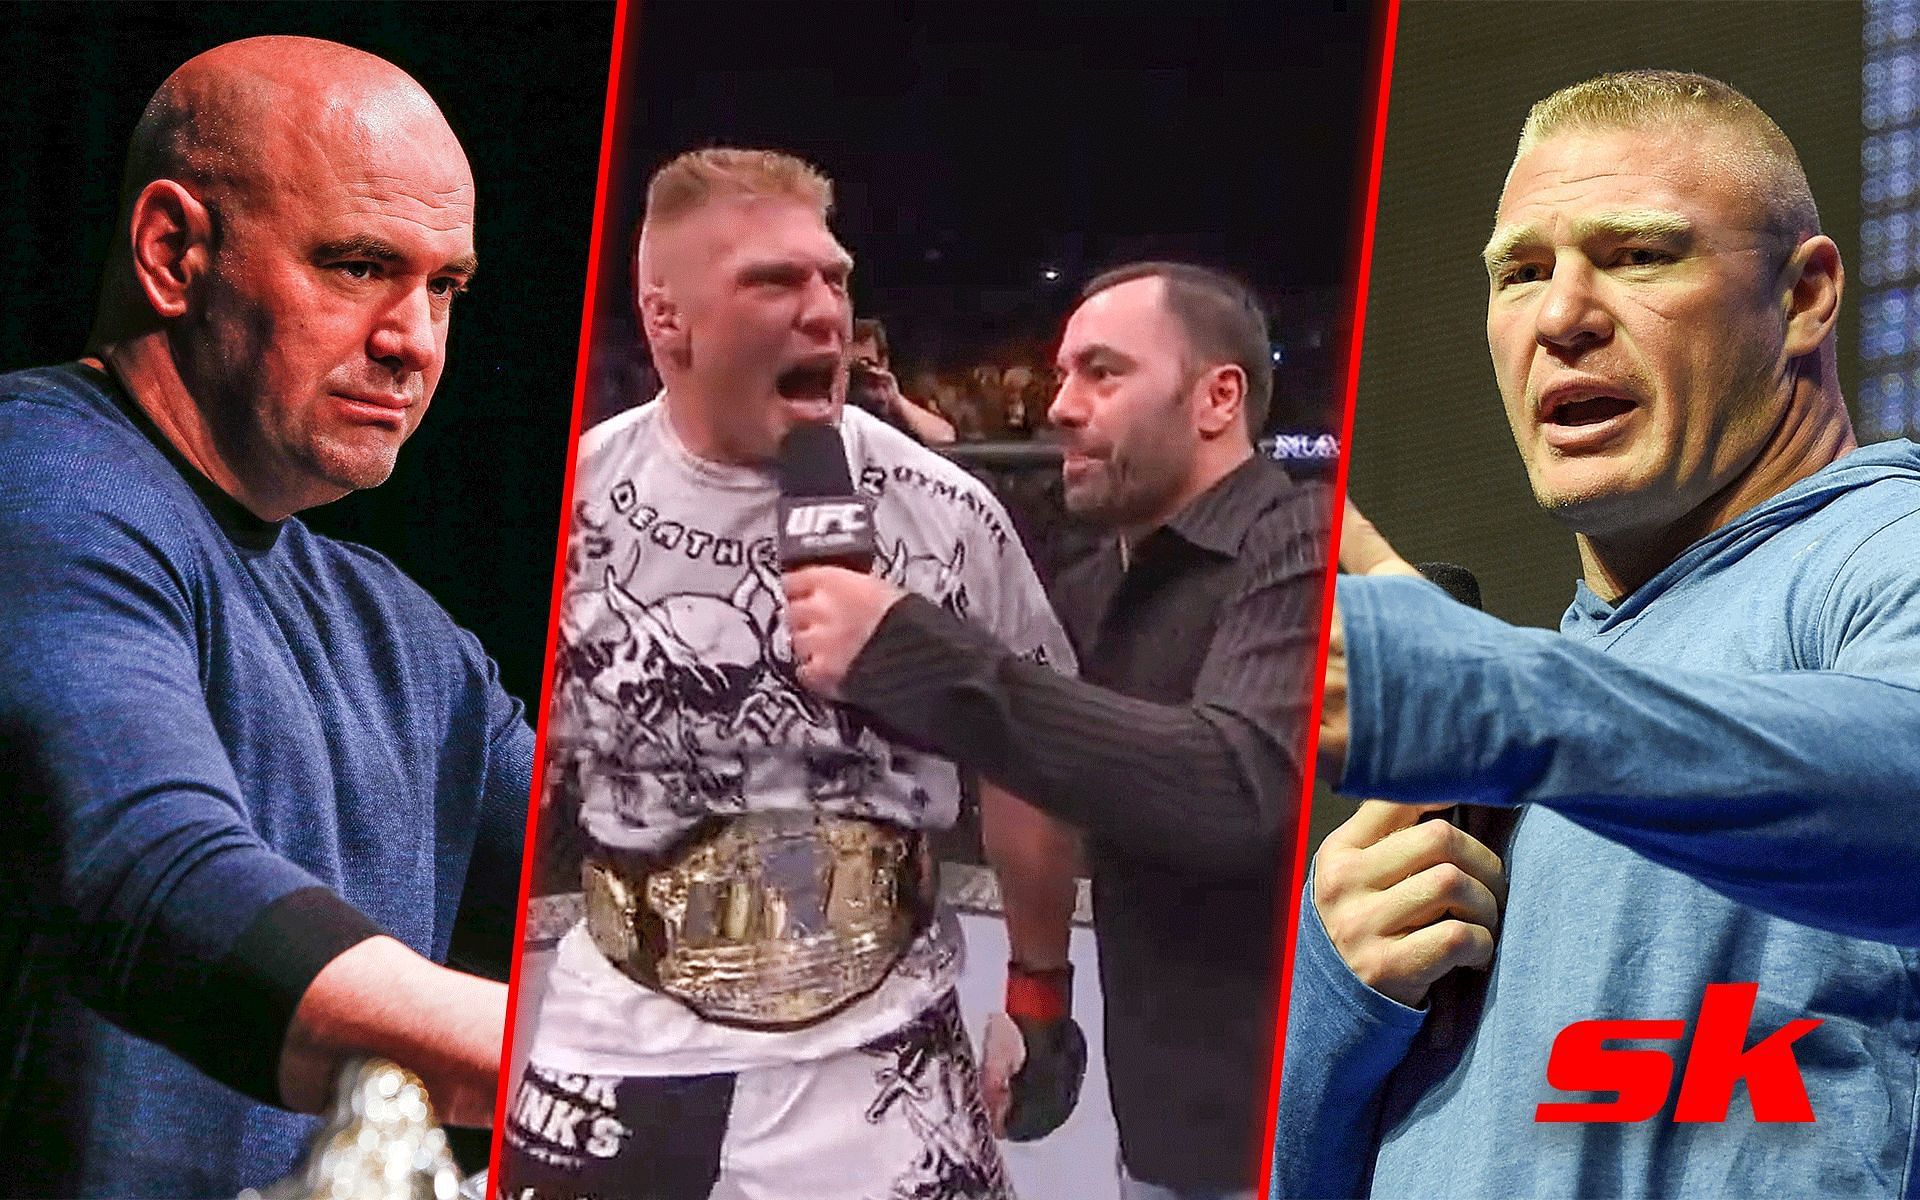 Dana White (Left), Brock Lesnar and Joe Rogan at UFC 100 (Middle), Brock Lesnar (Right) [Image courtesy: @oocmma on Twitter, Getty]